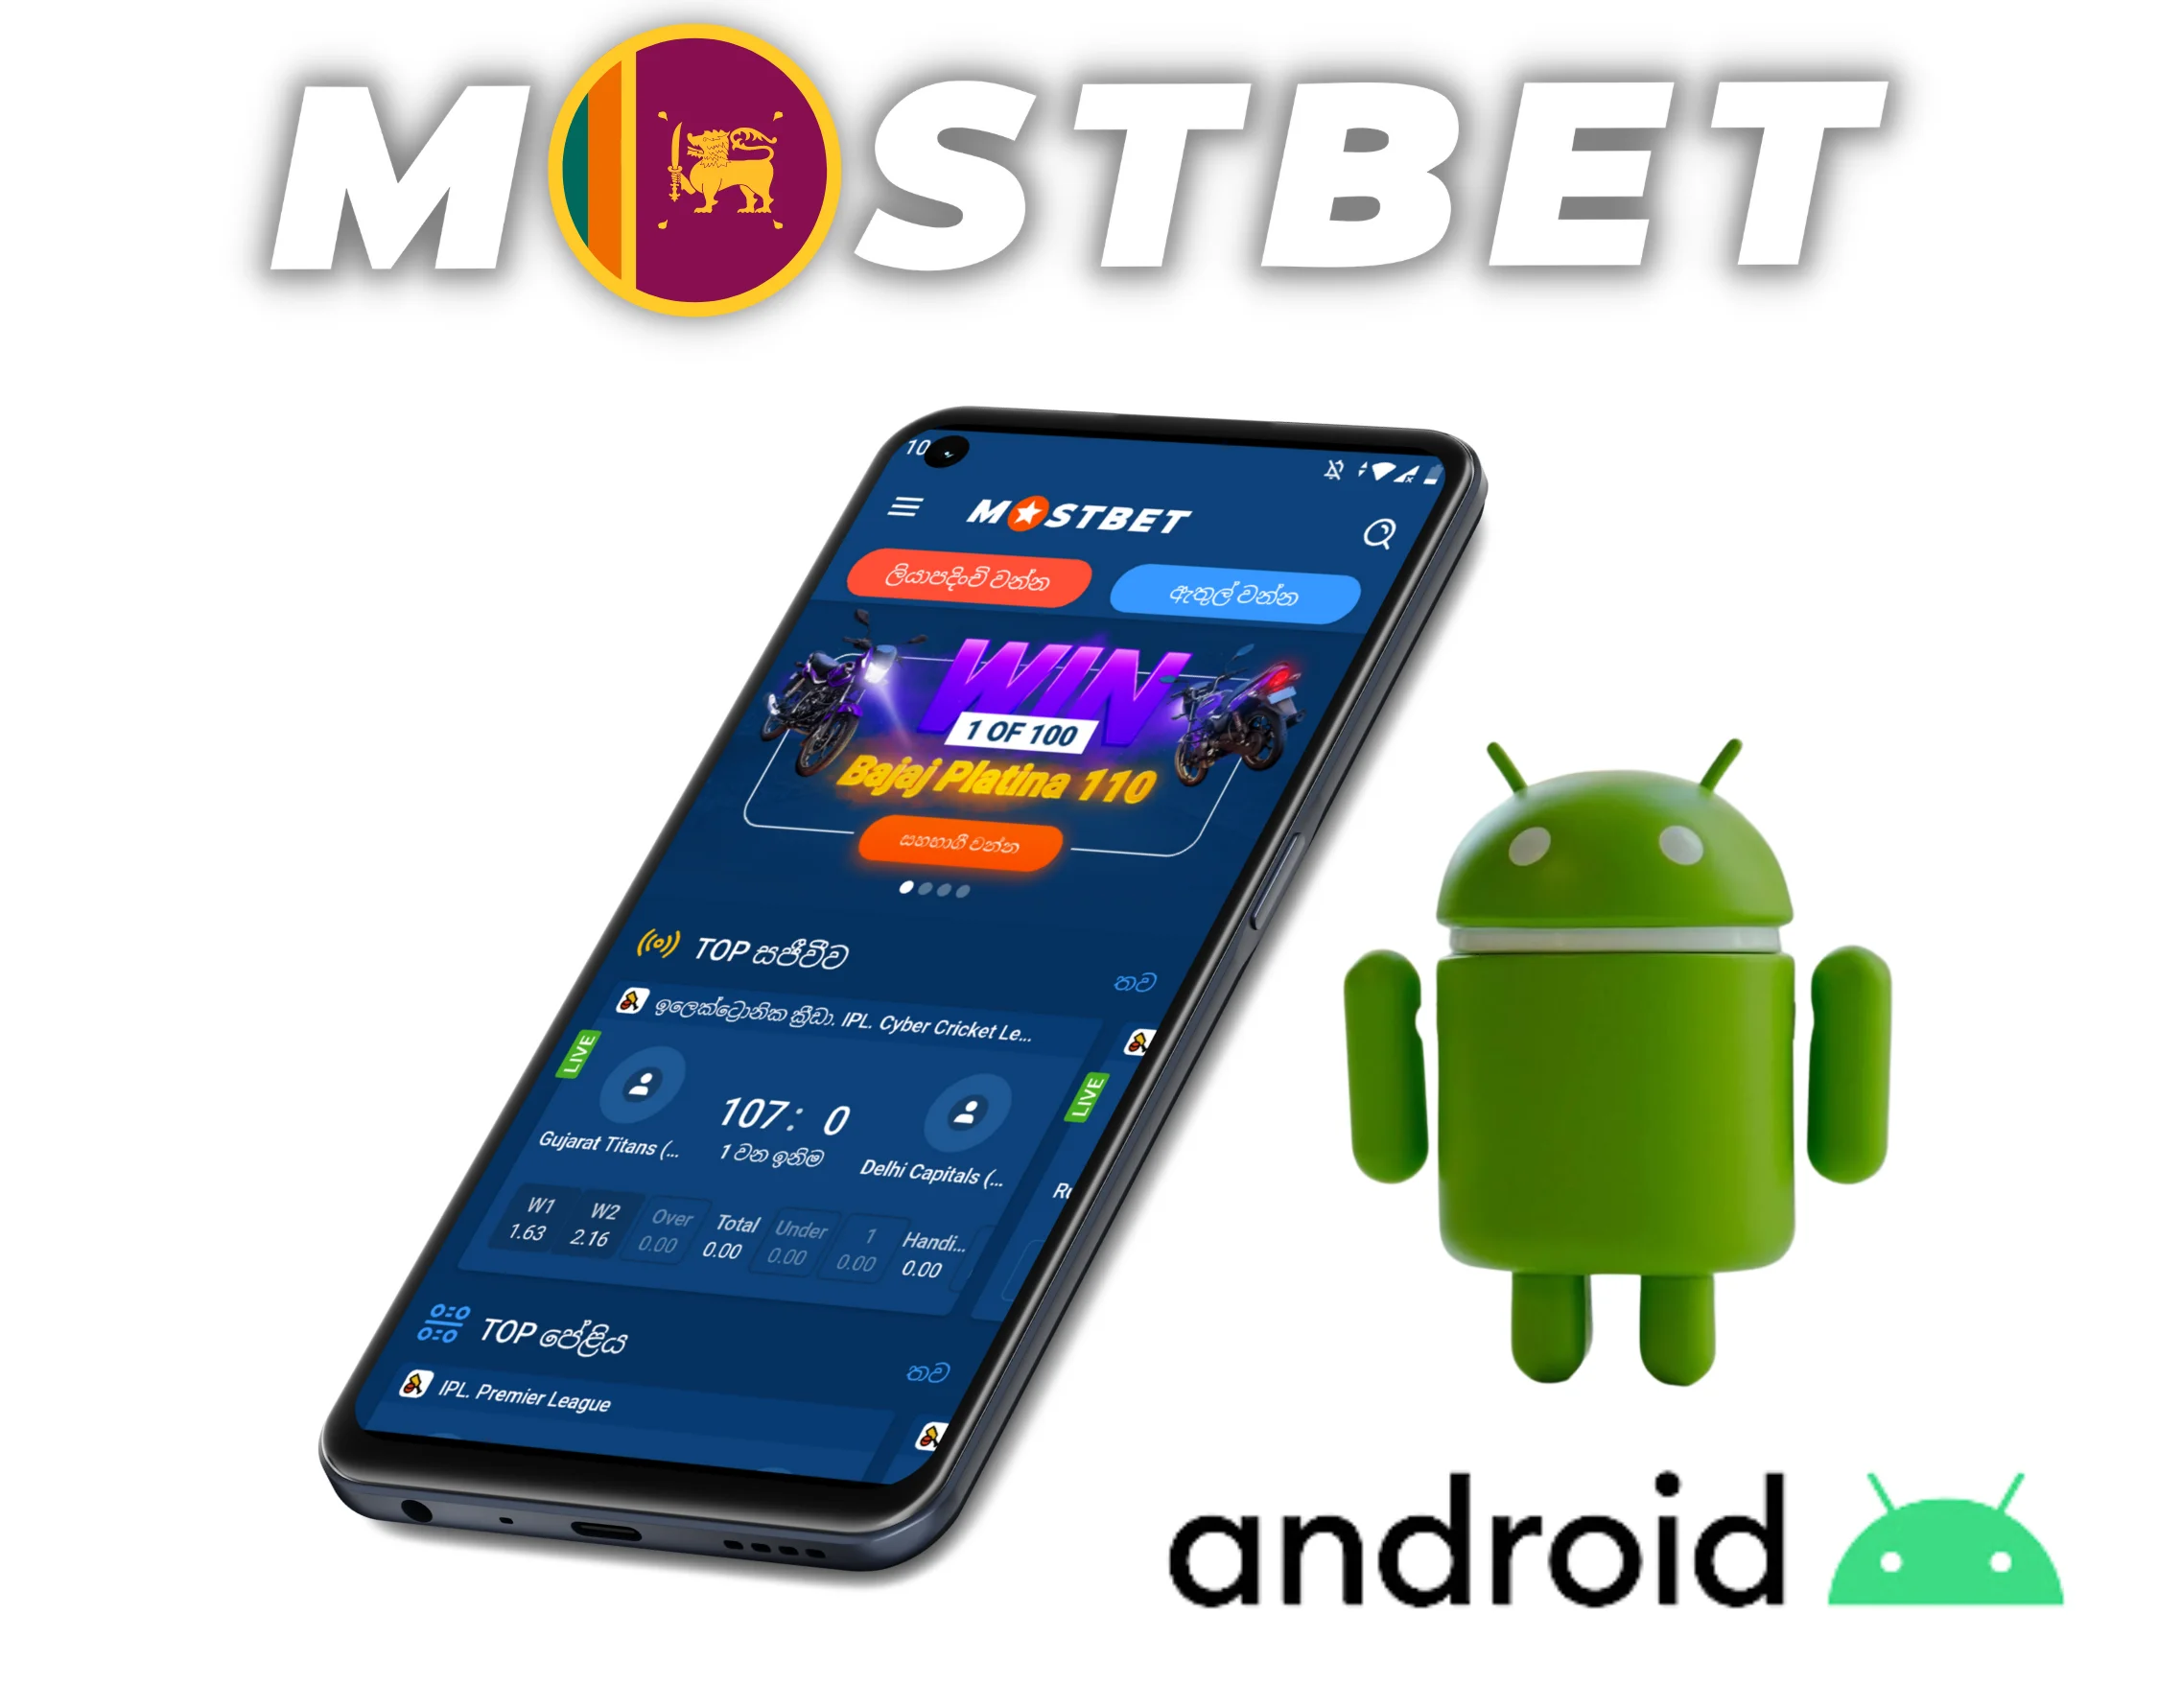 Super Easy Simple Ways The Pros Use To Promote Win Big at Mostbet: Top Betting Company and Casino in Egypt!